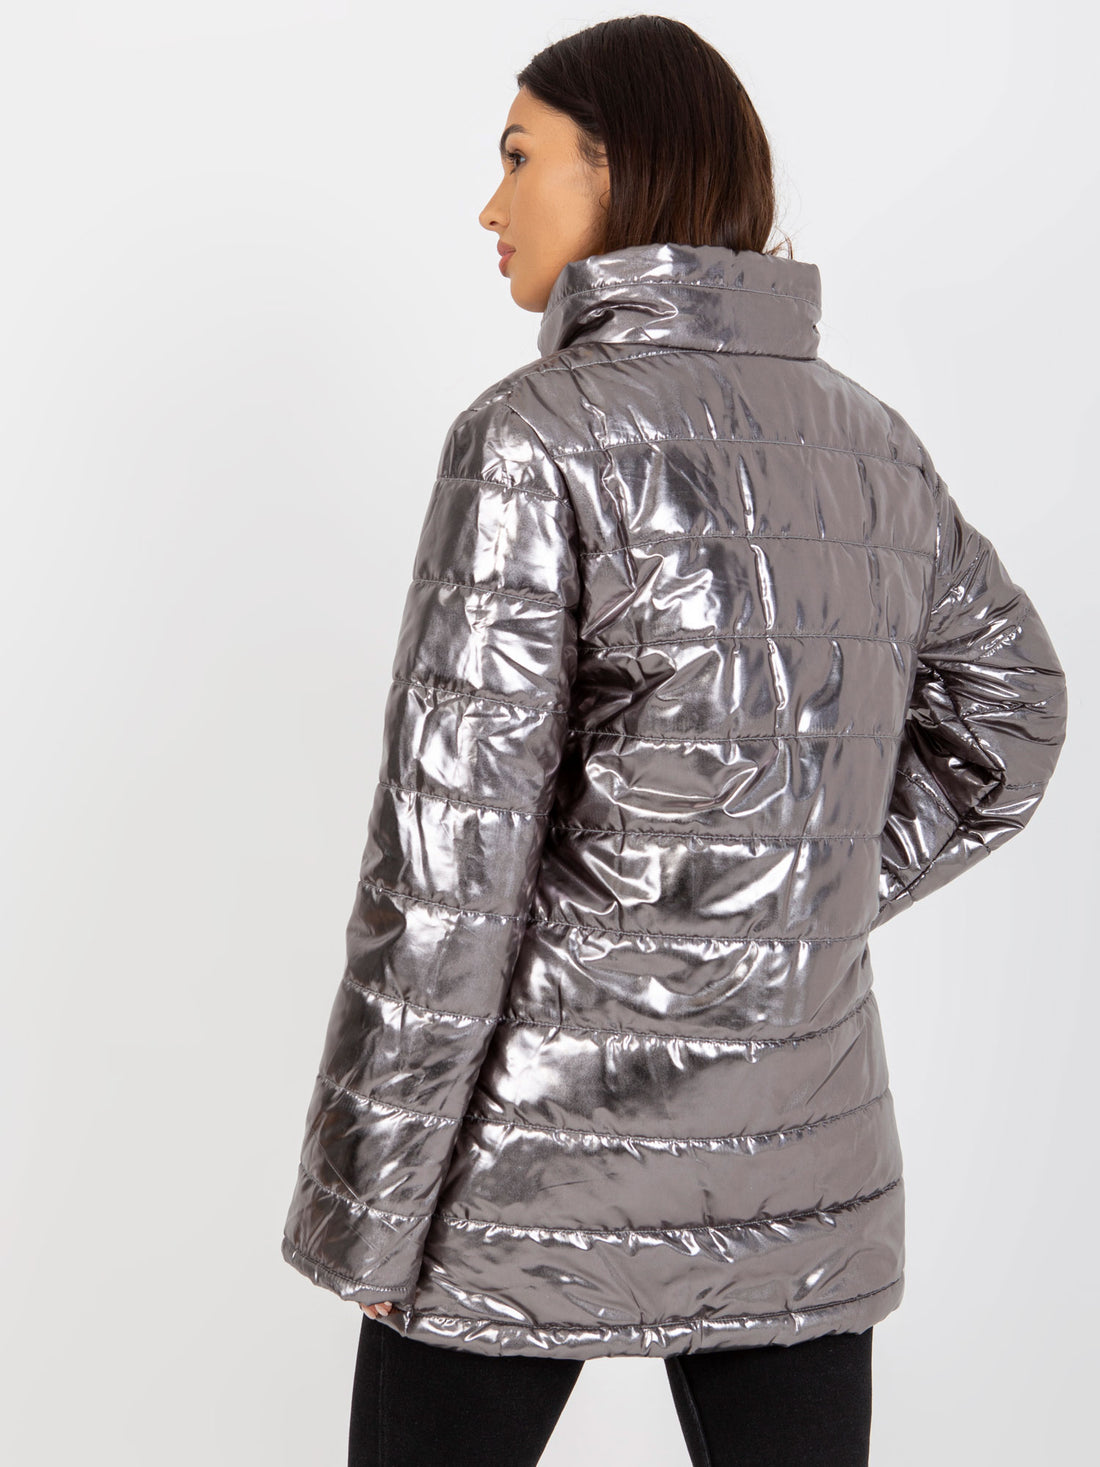 Metallic Silver Puffer Jacket with Pockets